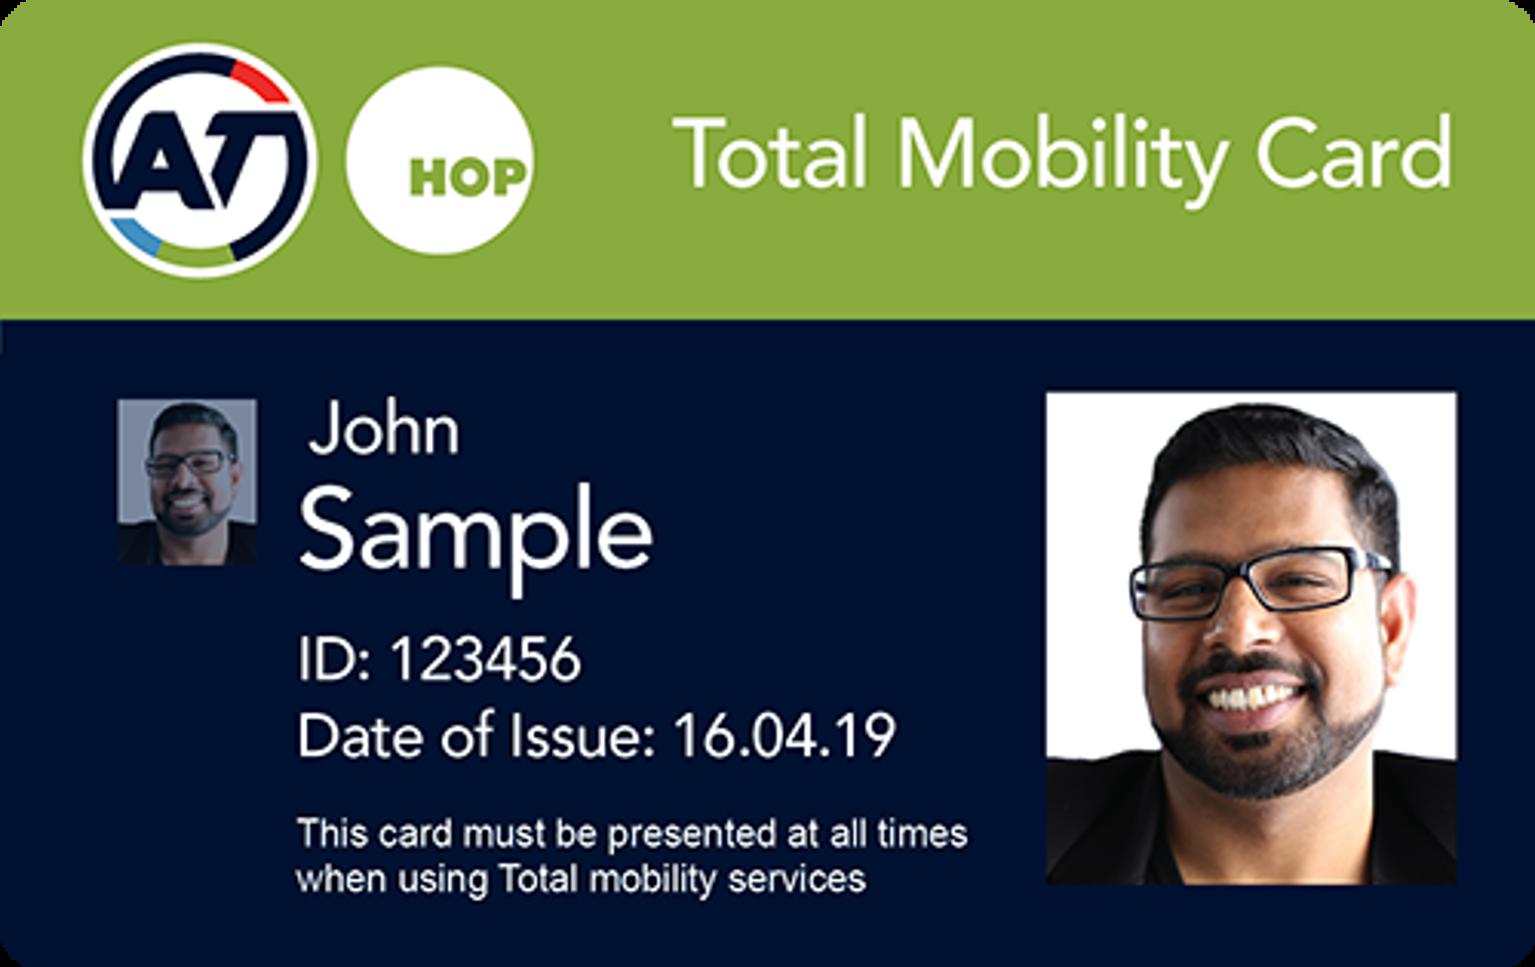 Sample of what a Total Mobility Card looks like. It includes the person's name, their card ID and the date of issue.